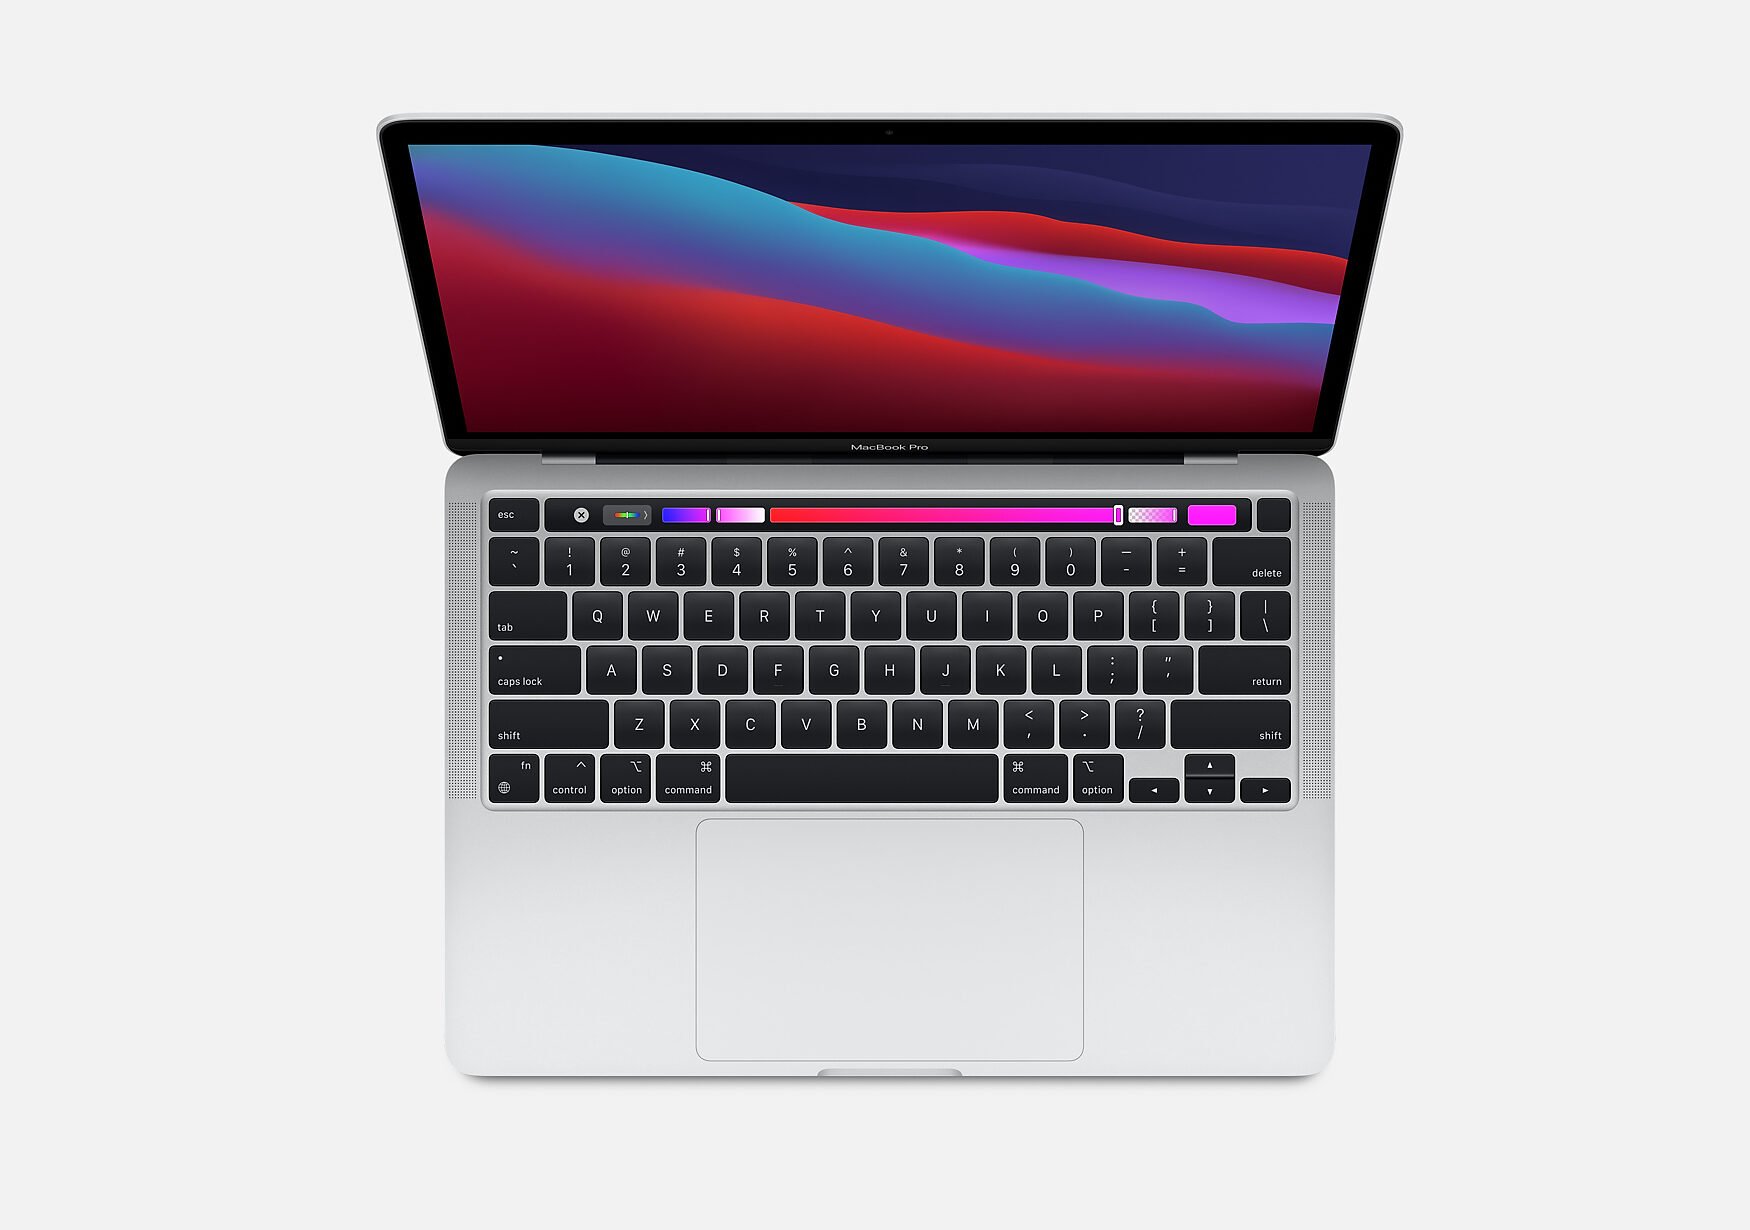 Hot Deal: MacBook Air M1 goes on sale for $699 - Apple - News